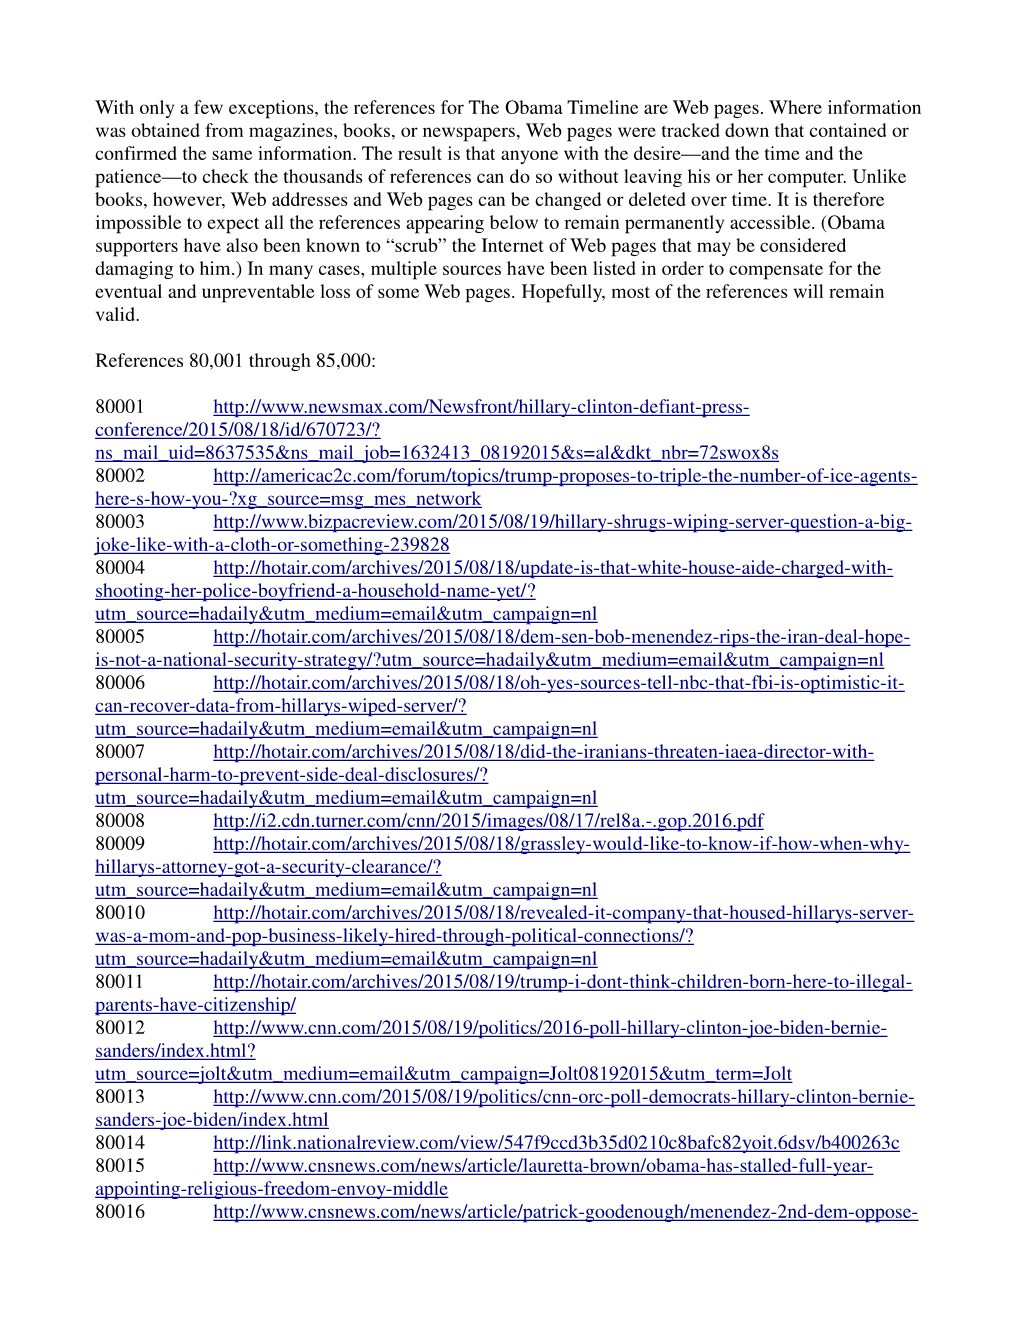 With Only a Few Exceptions, the References for the Obama Timeline Are Web Pages